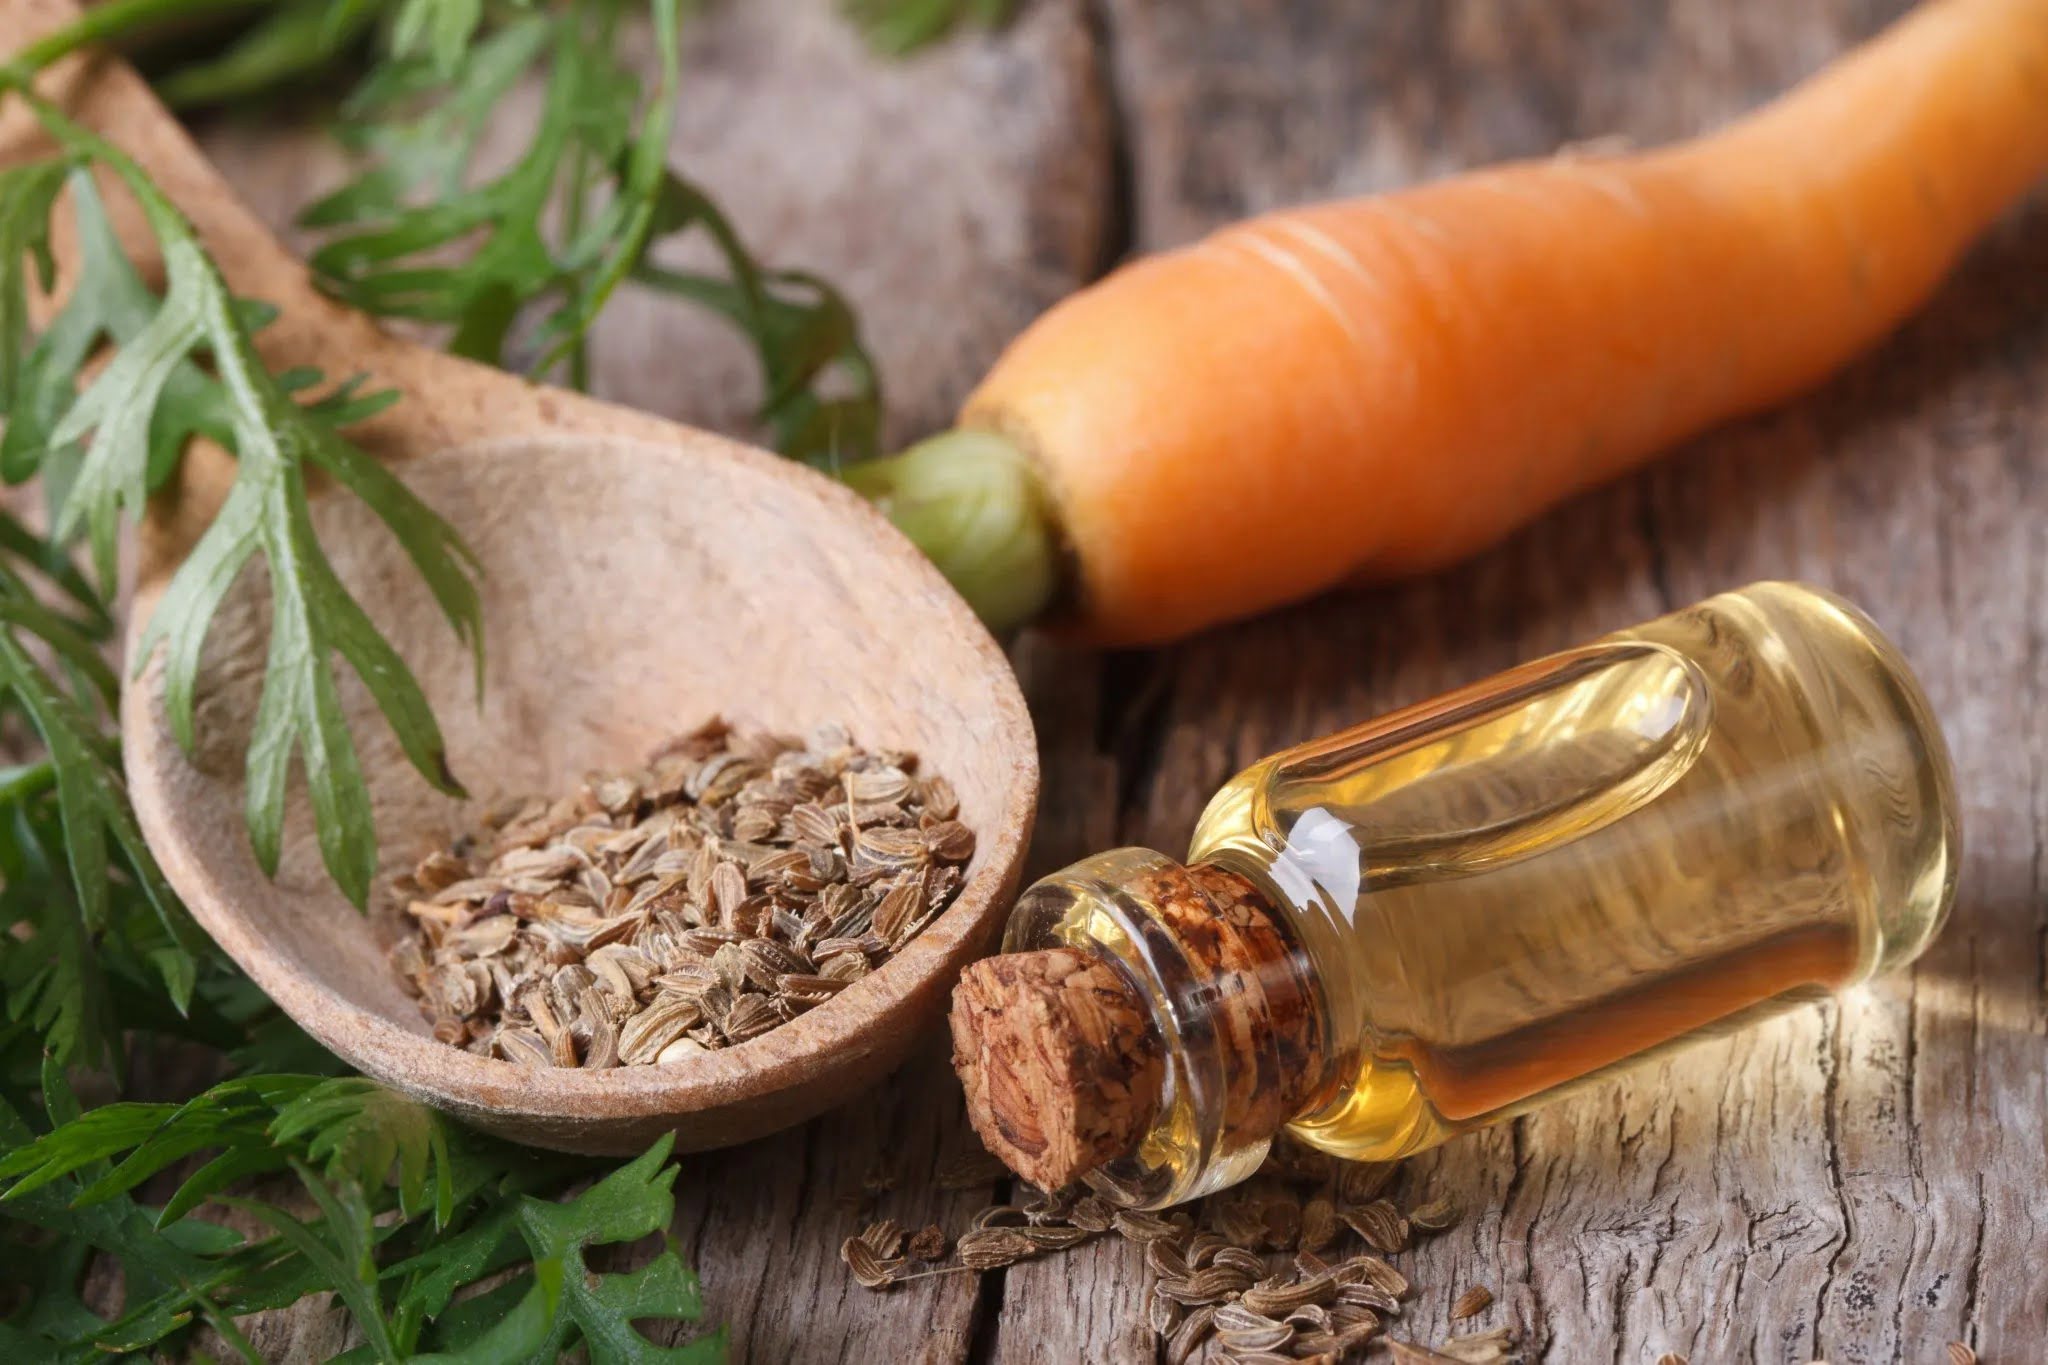 How To Use Carrot Seed Oil For Face